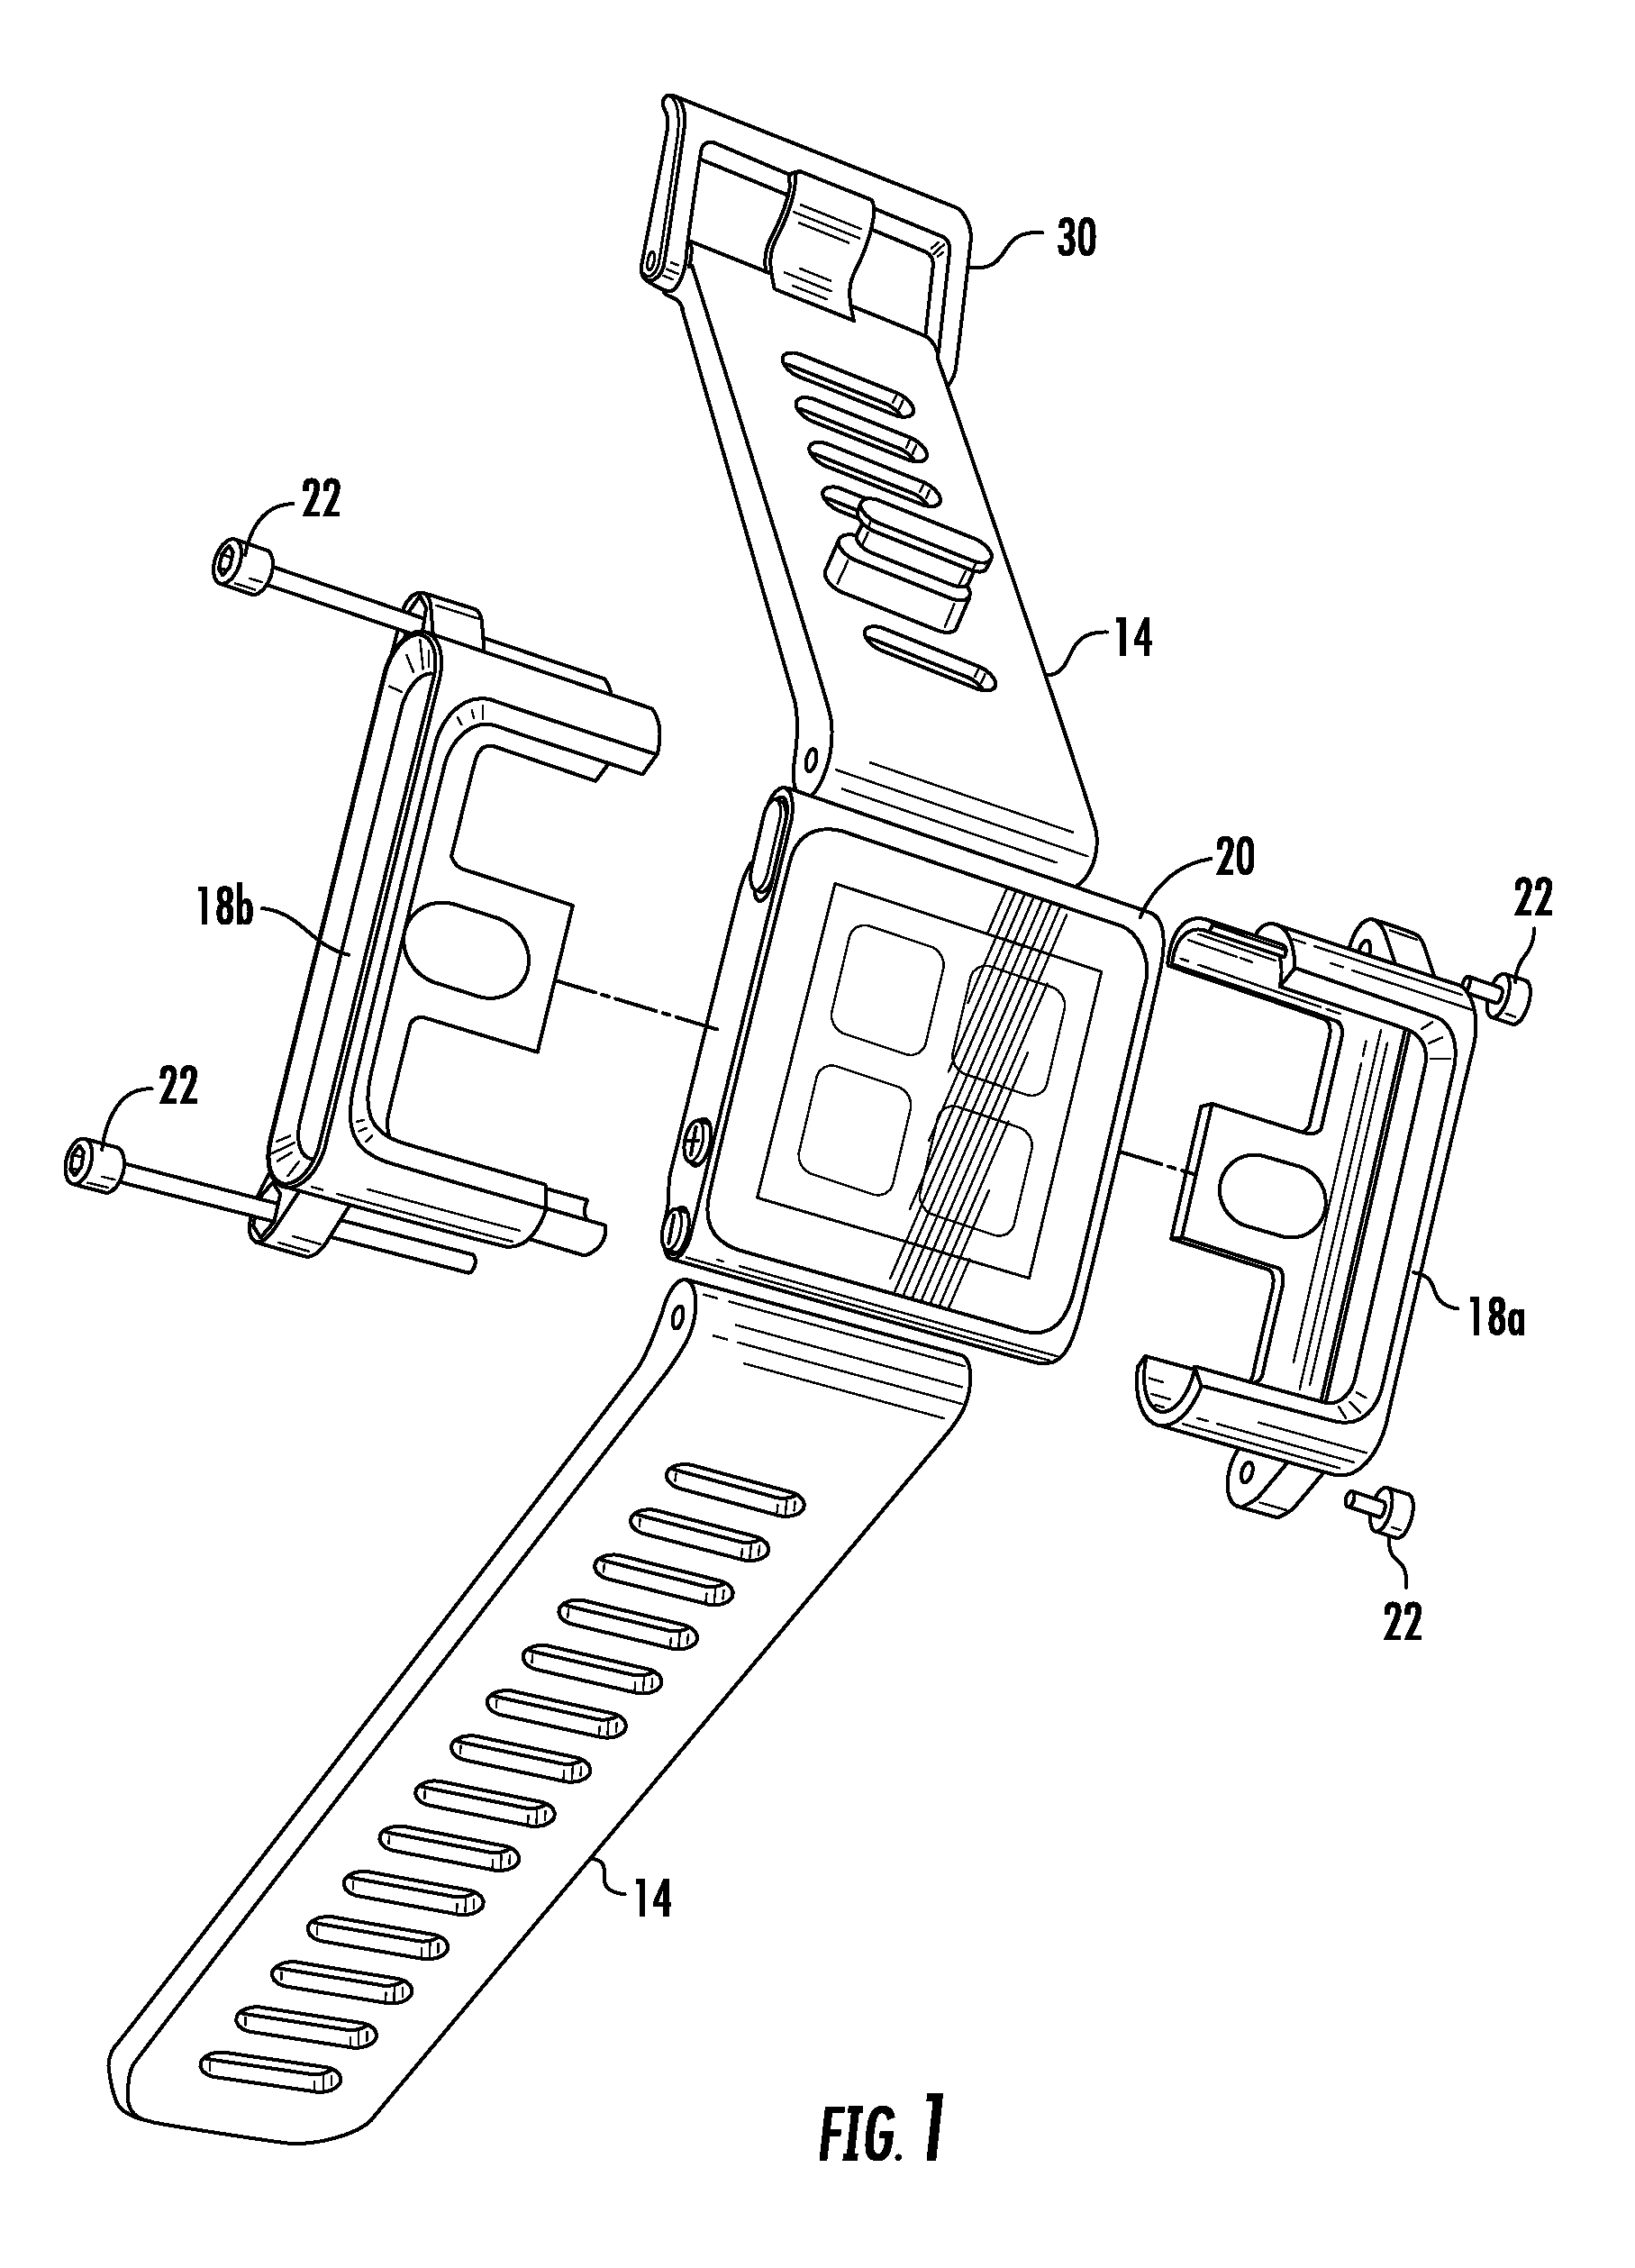 Electronic device casing